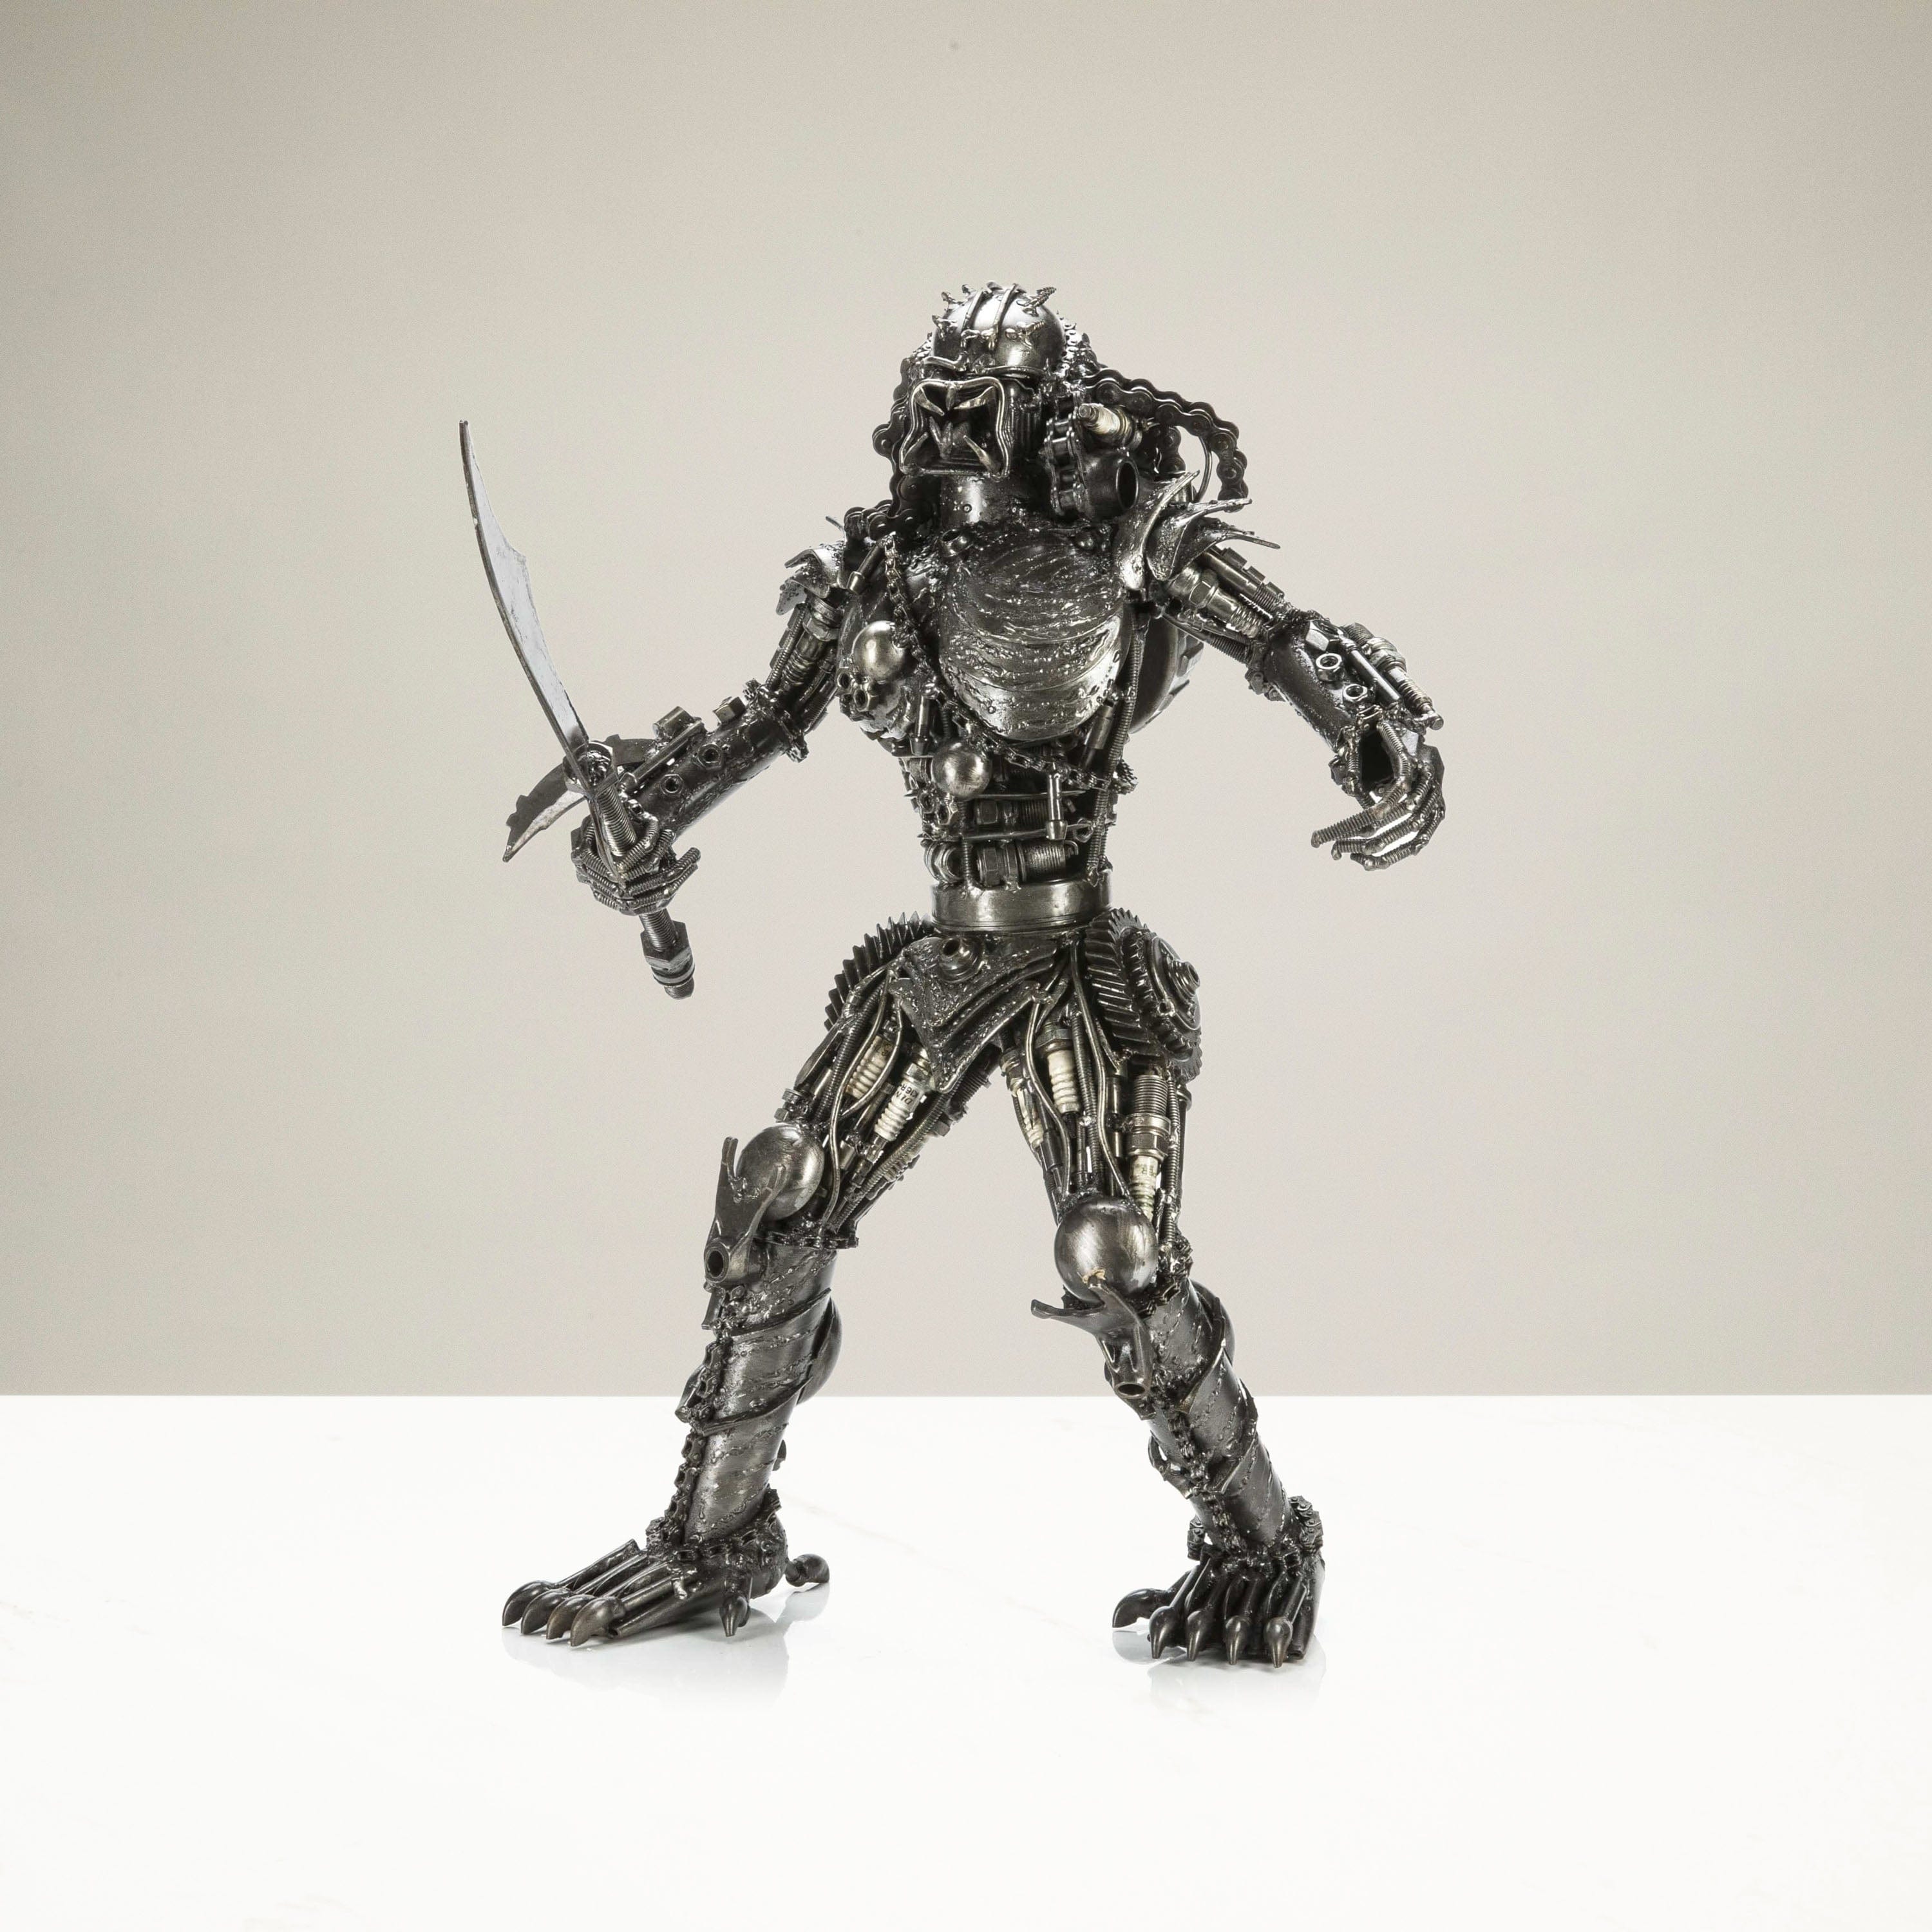 Kalifano Recycled Metal Art 23" Predator with Sword Inspired Recycled Metal Sculpture RMS-P58x41-S02